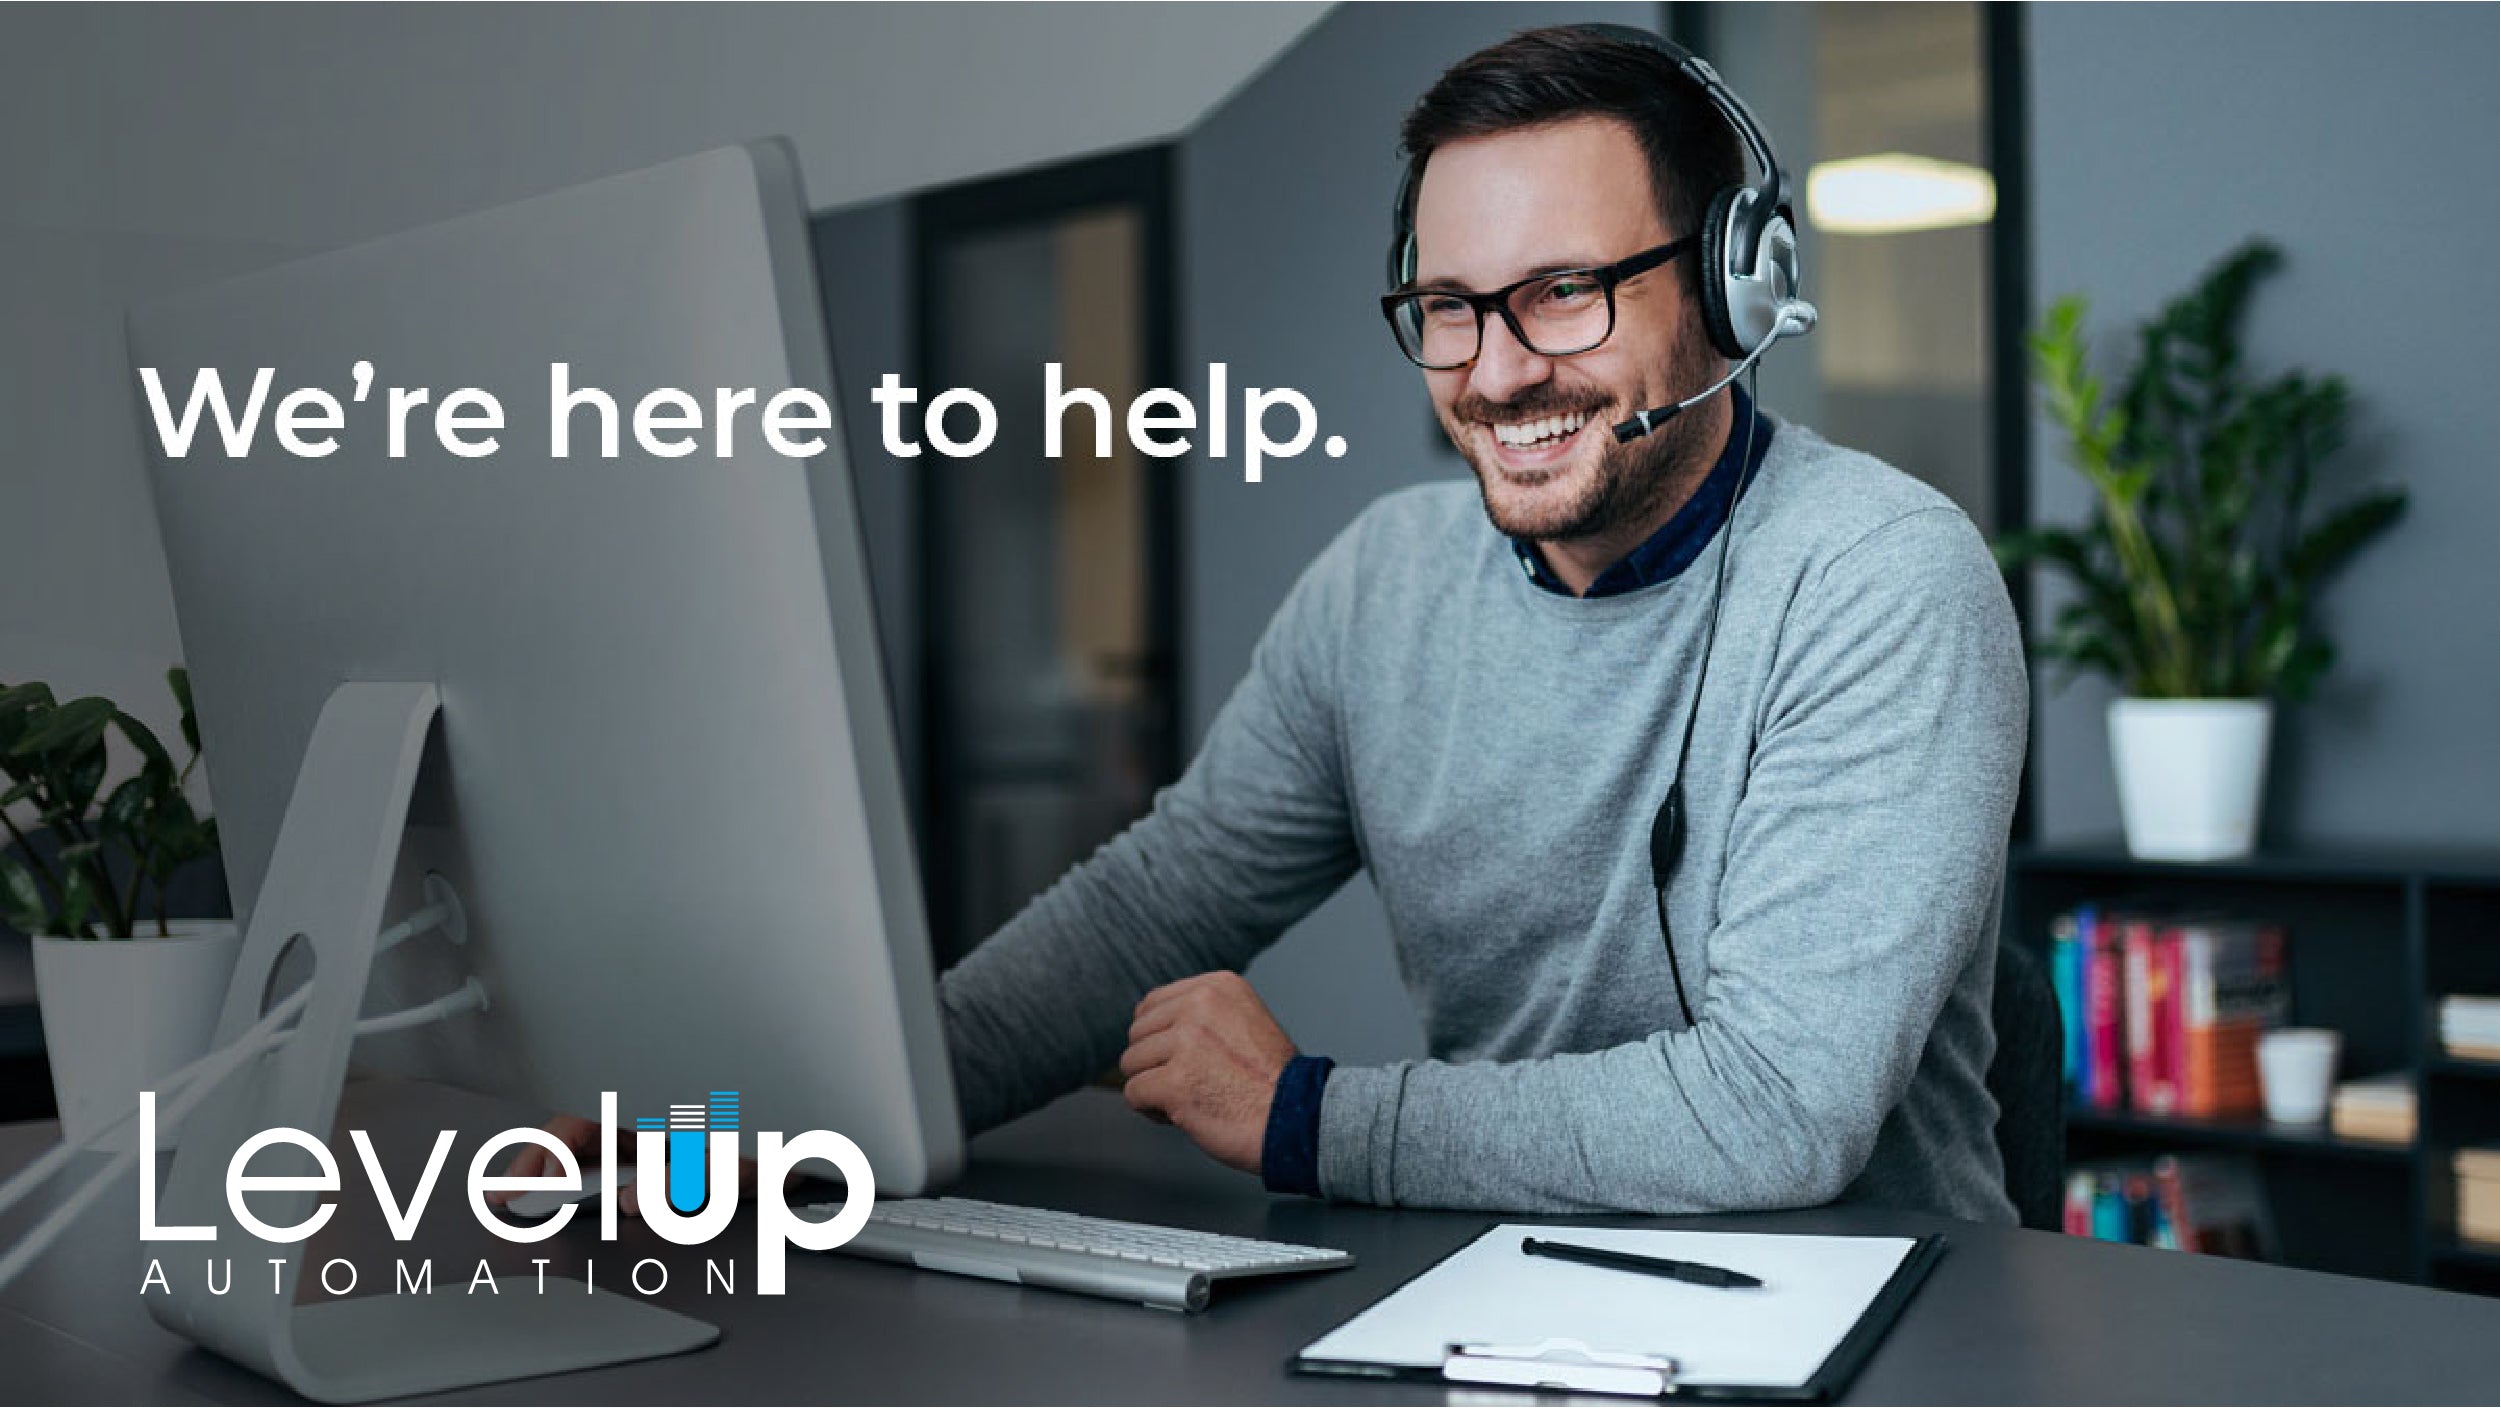 Level Up Automation Announces Free Home Tech Support Amid COVID19